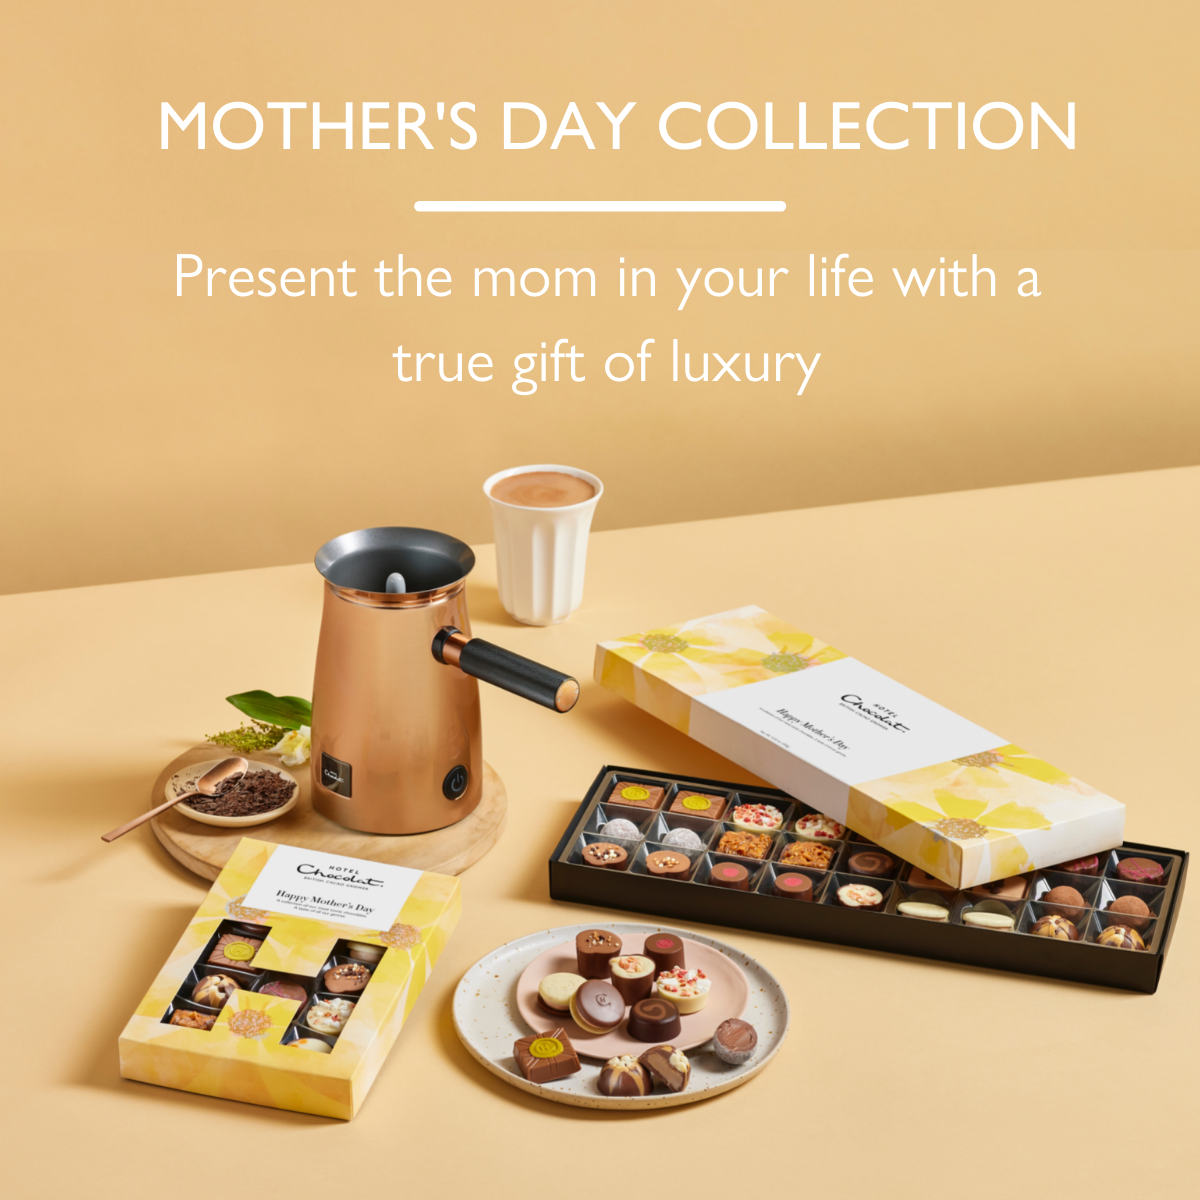 Mother's day collection: present the mom in your life with a true gift of luxury